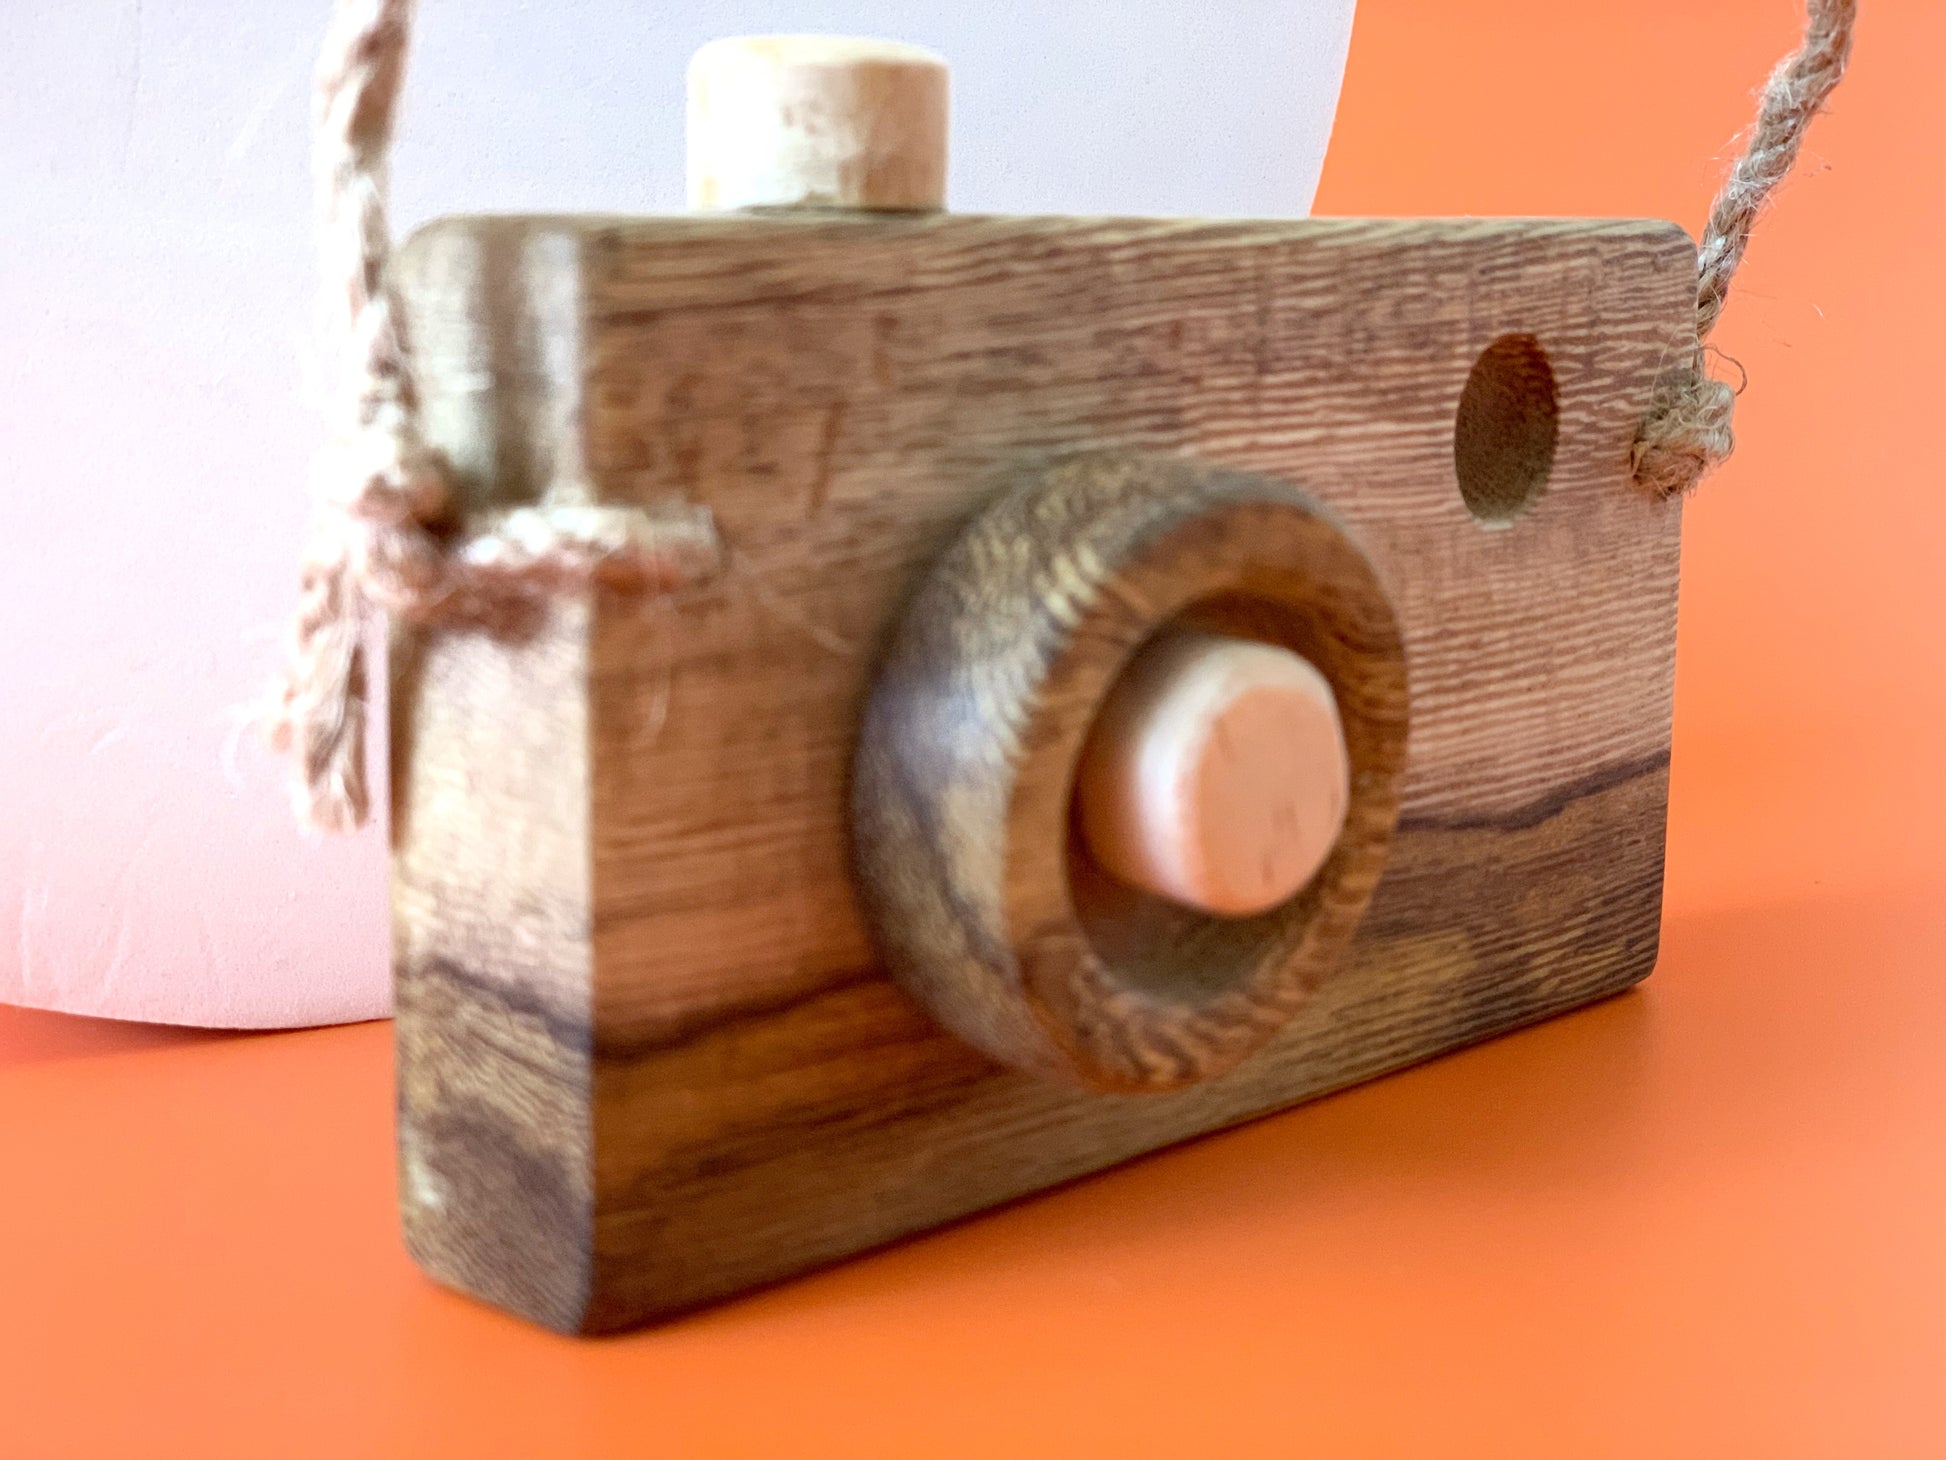 Toy Camera - My first wooden toy